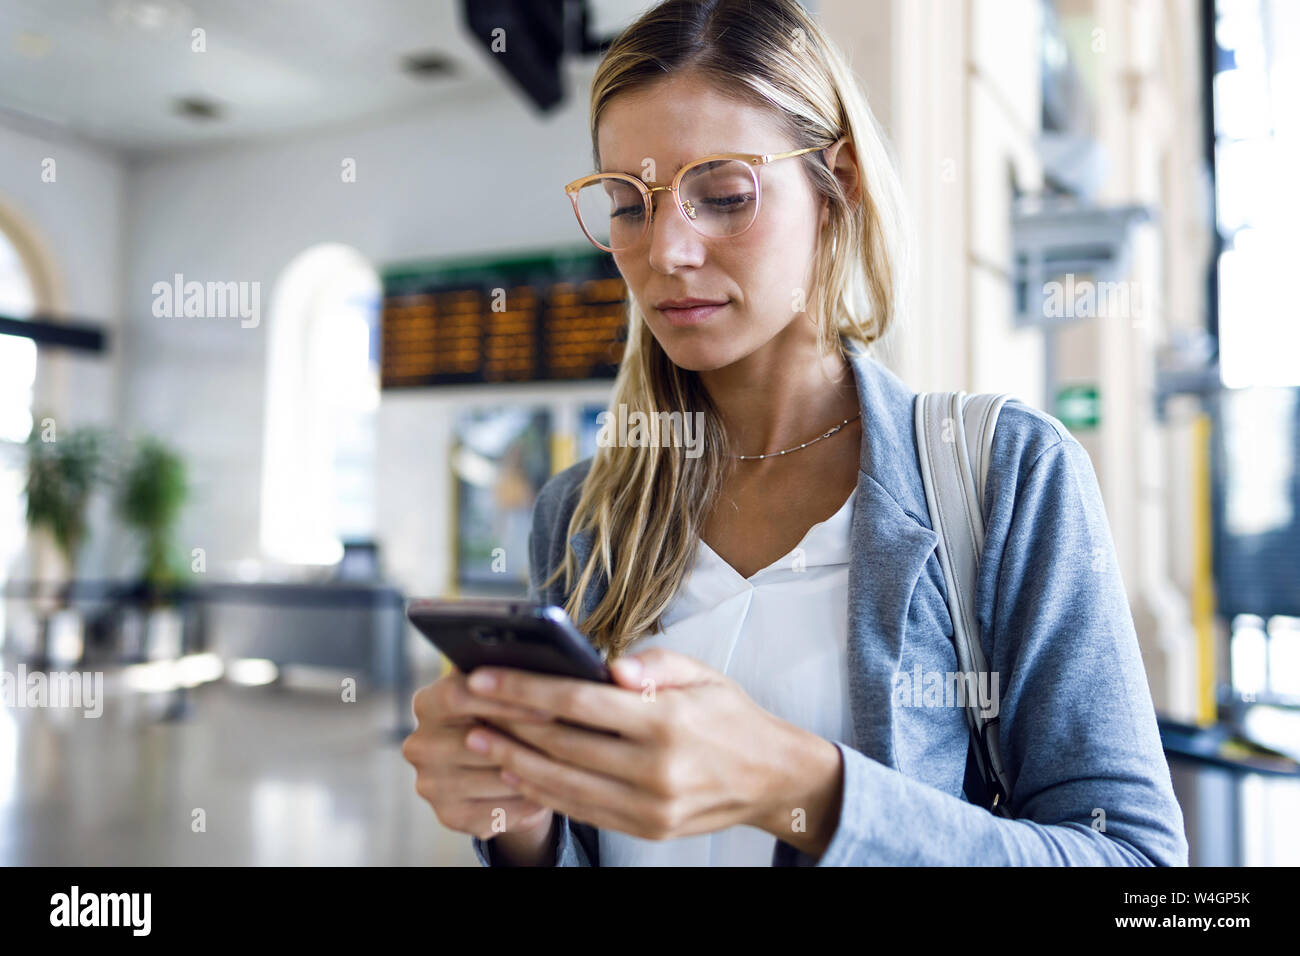 Young woman texting with her mobile phone in the train station hall Stock Photo